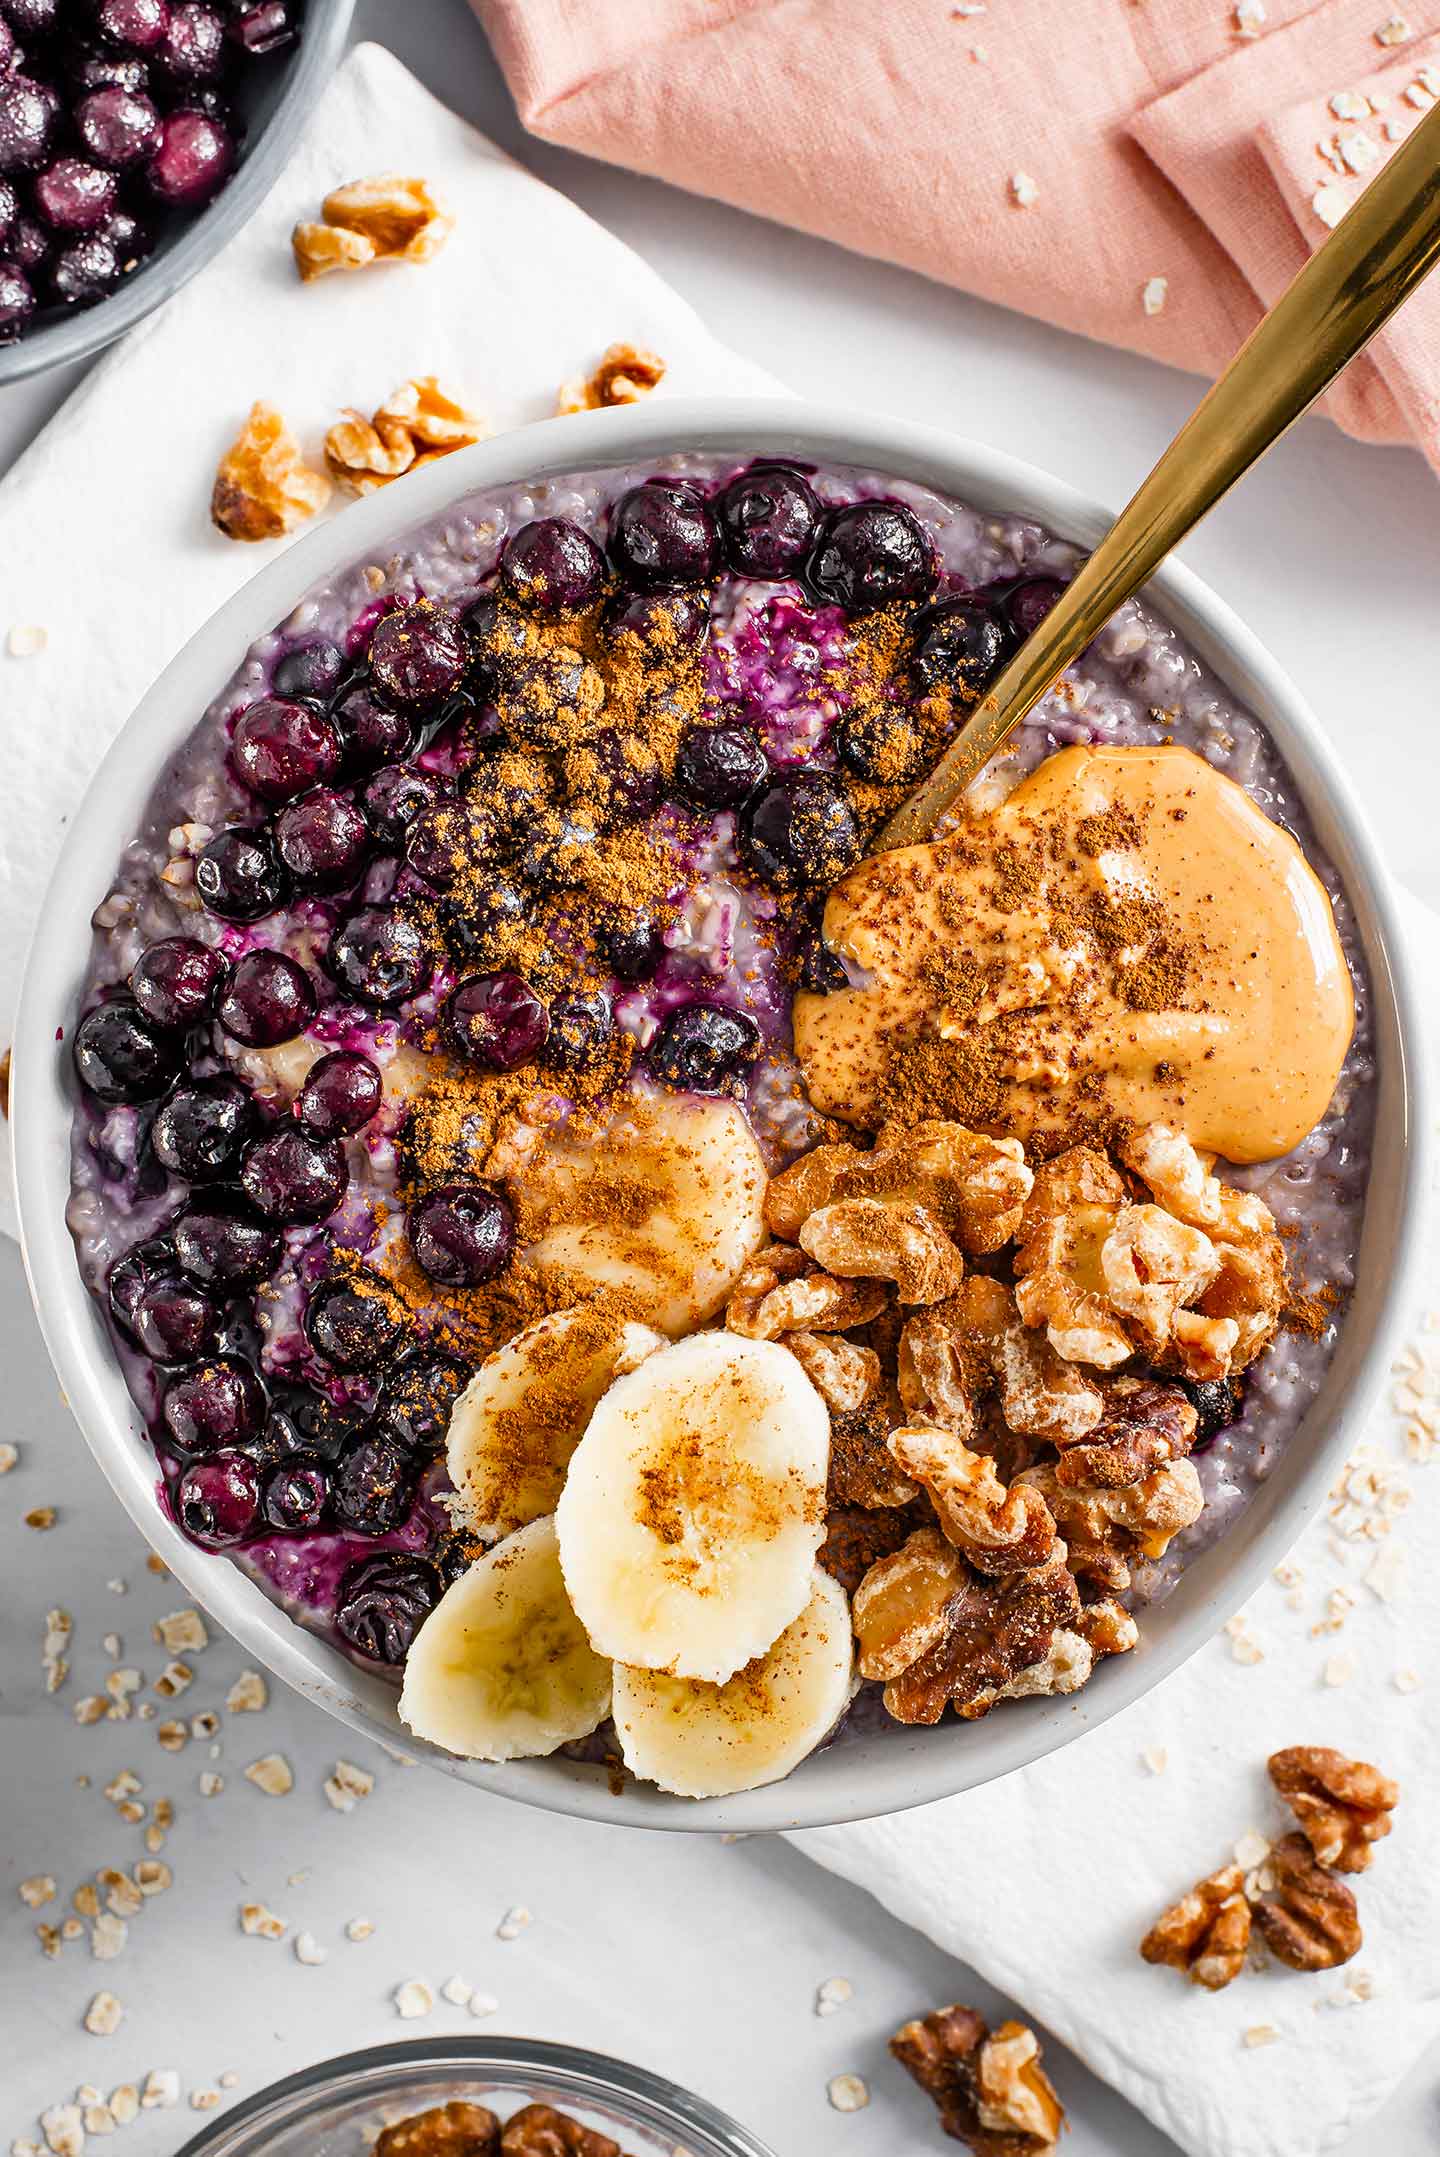 Top down view of blueberry banana oats in a bowl with walnuts, extra blueberries and a pink napkin just visible in the frame.